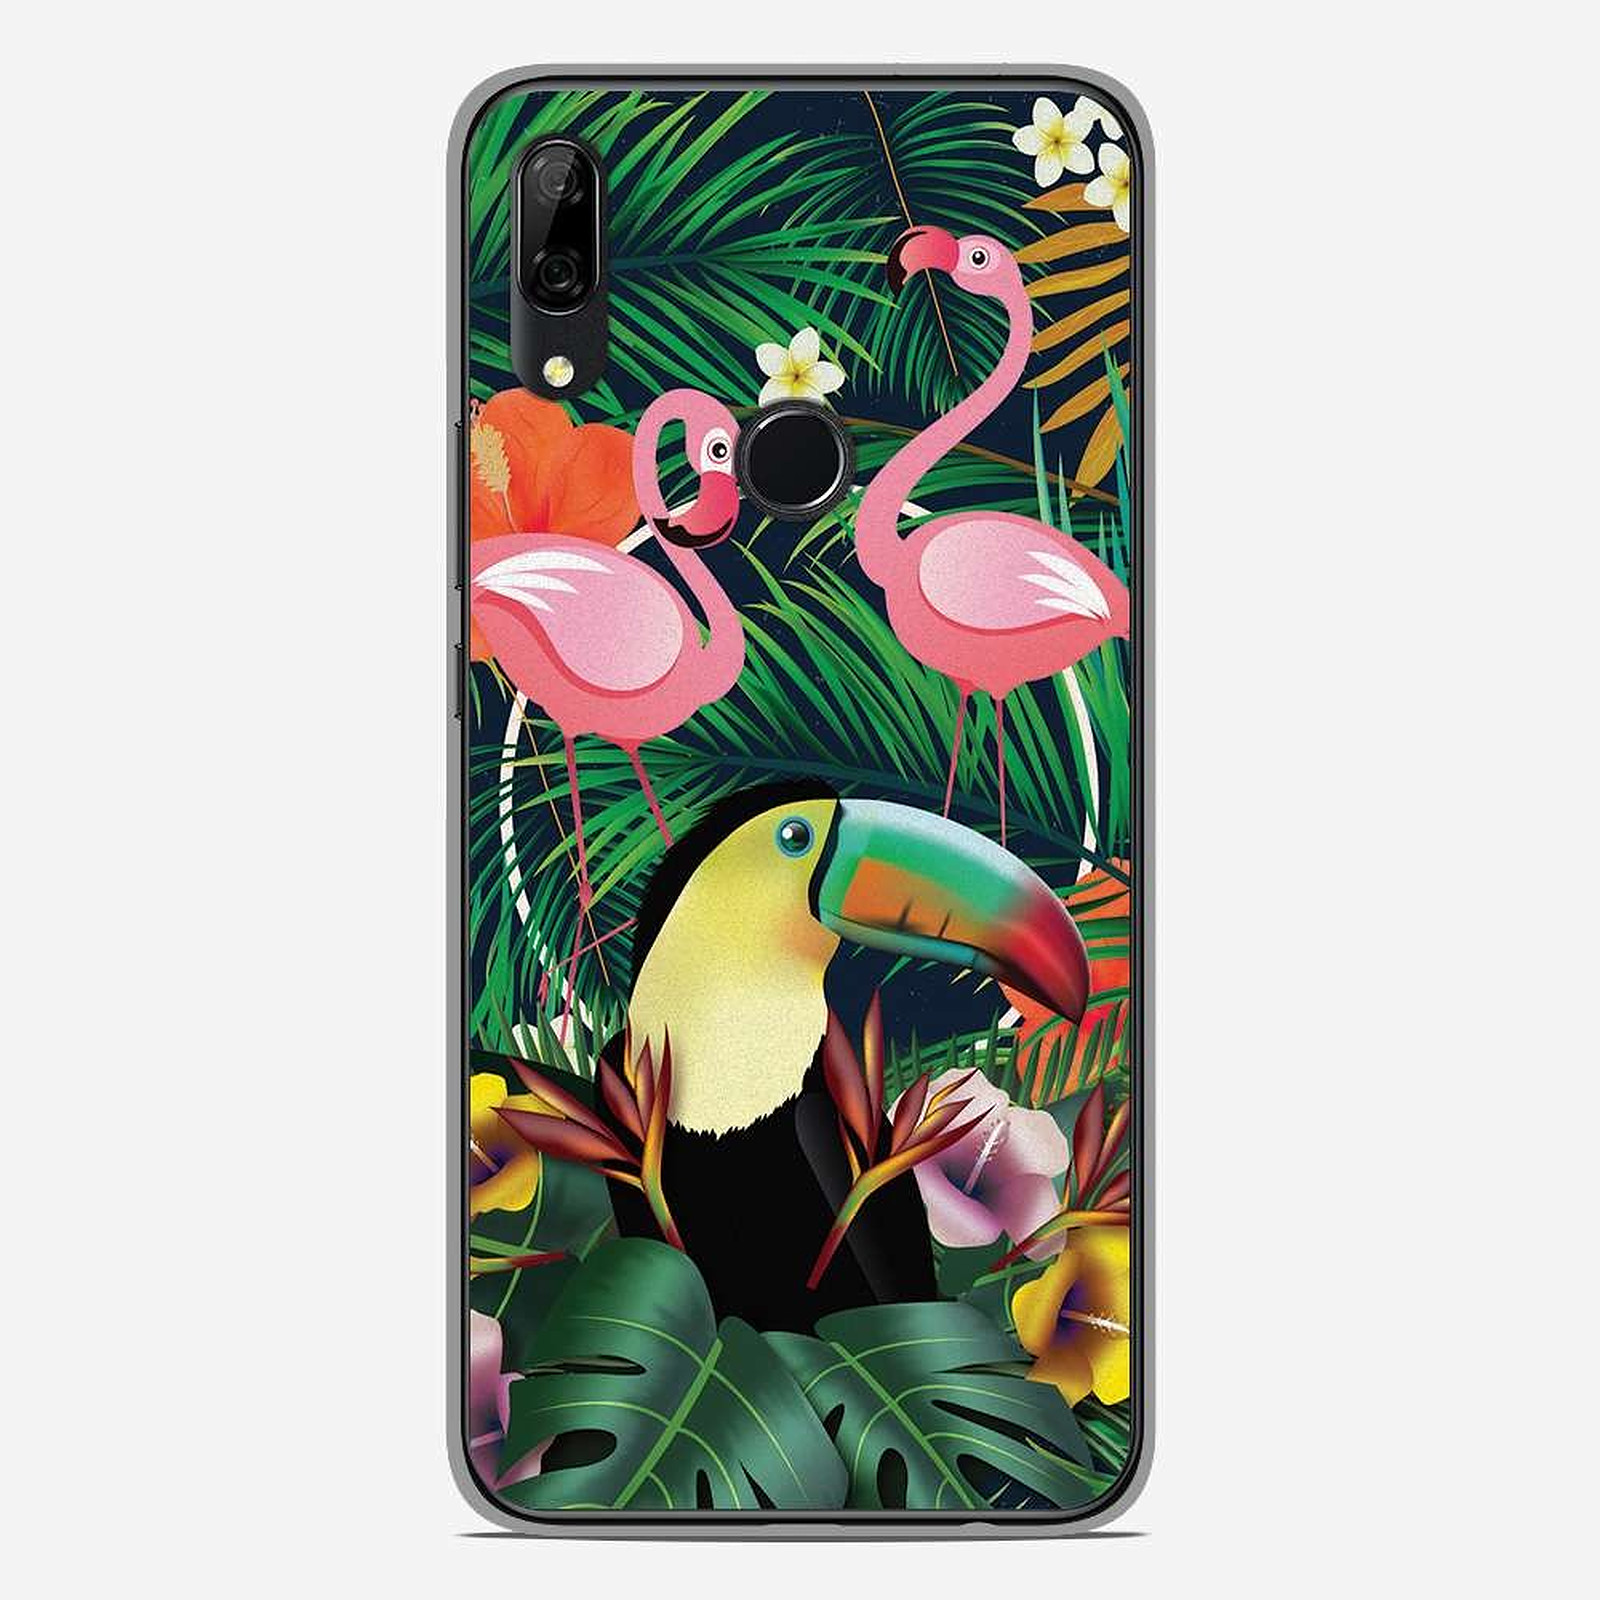 1001 Coques Coque silicone gel Huawei P Smart Z motif Tropical Toucan - Coque telephone 1001Coques